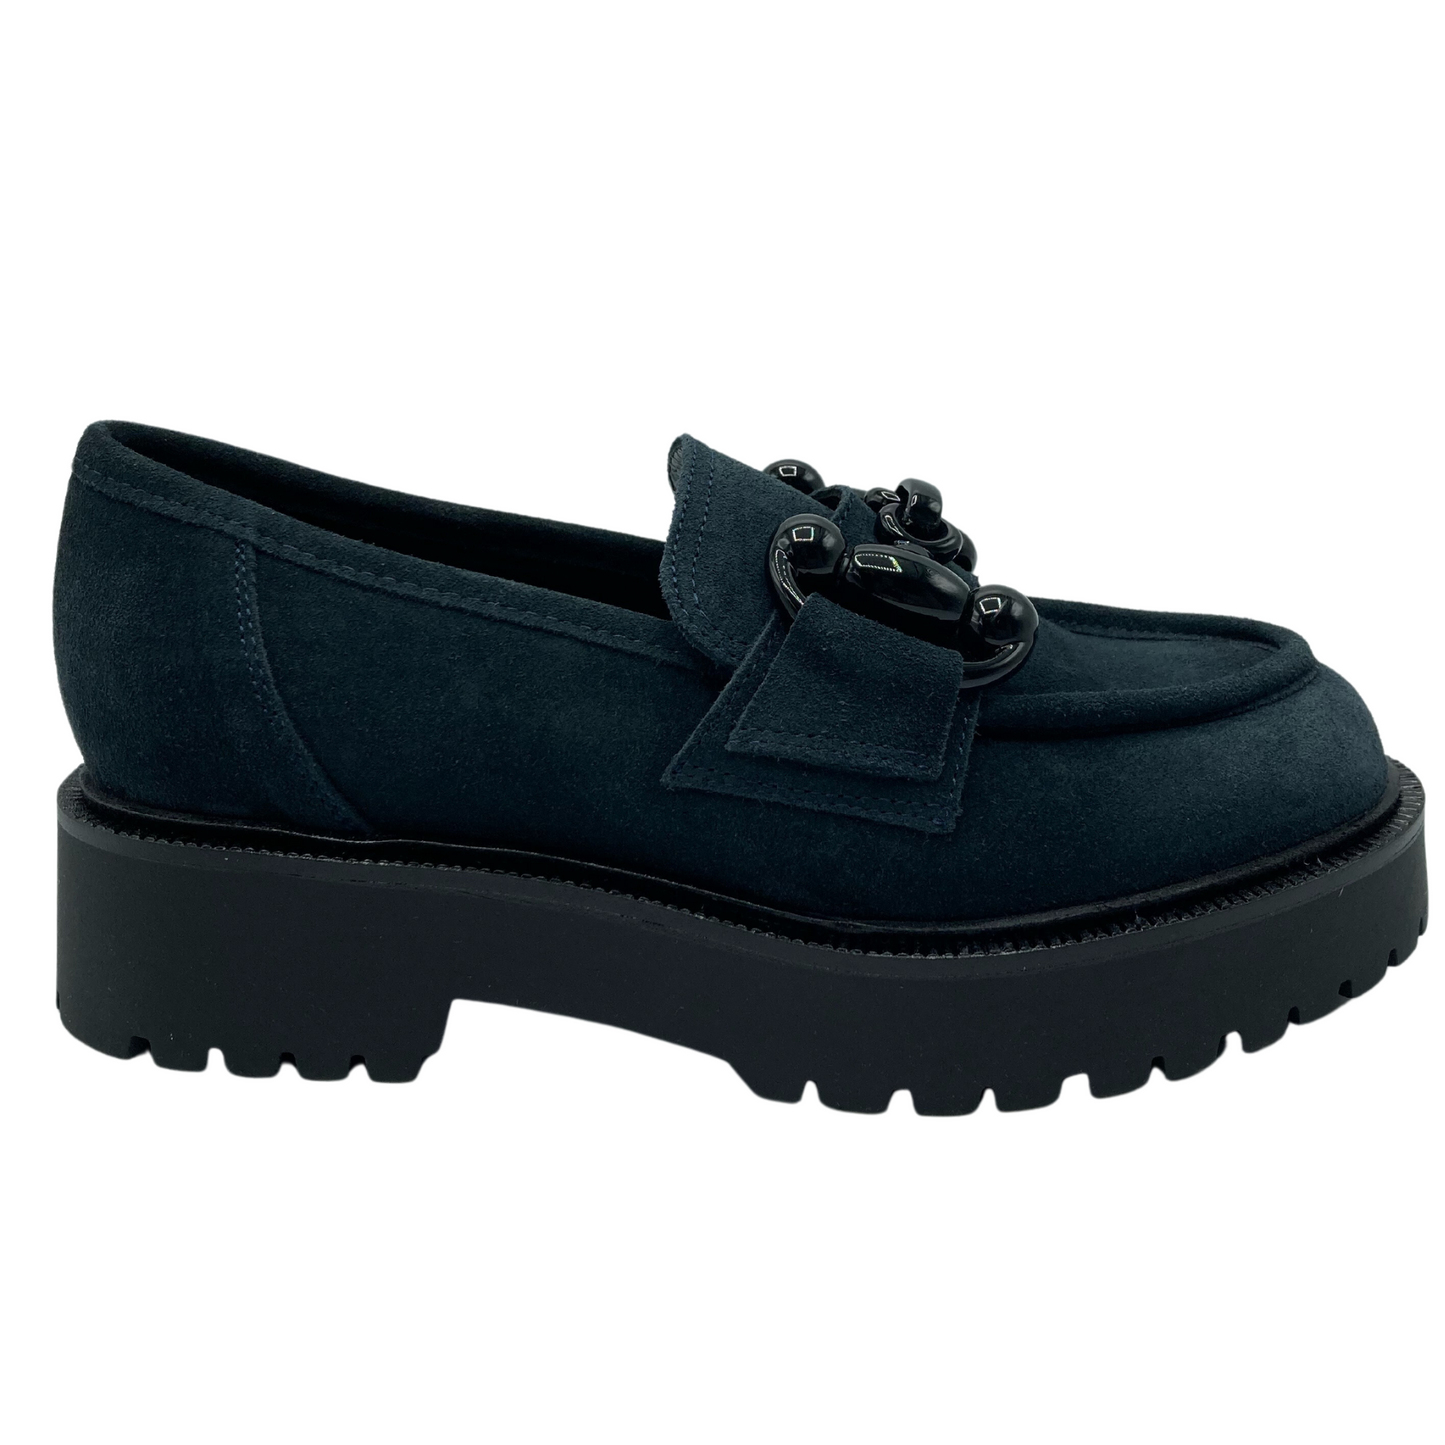 Right facing view of navy suede loafer with black lug sole, leather lining and black buckle detail on upper